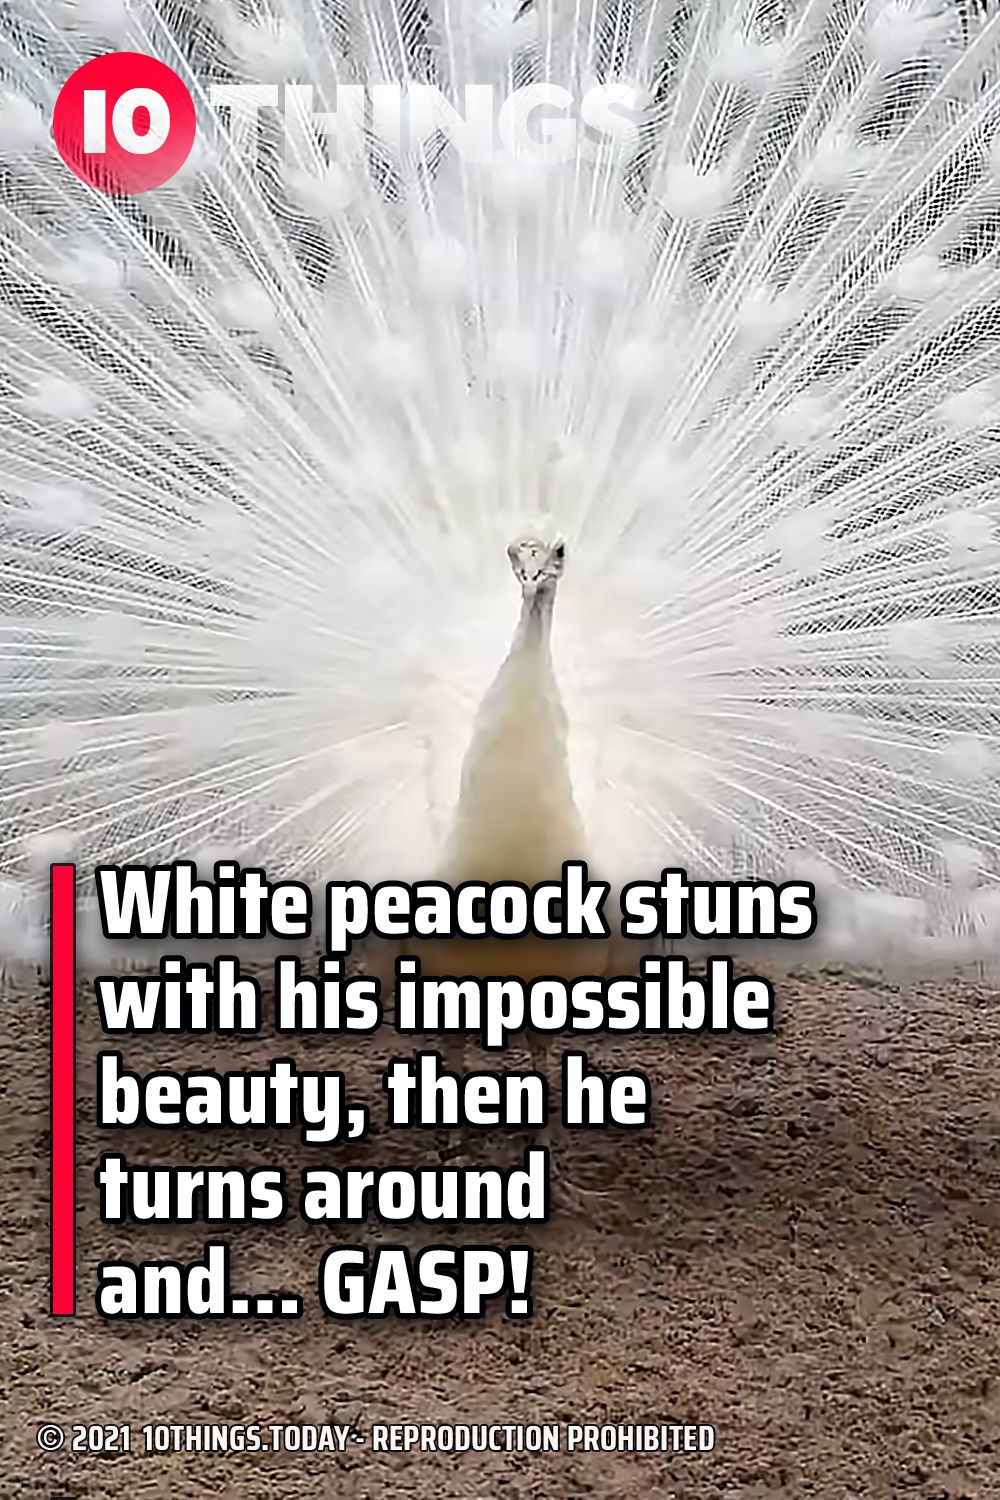 White peacock stuns with his impossible beauty, then he turns around and… GASP!